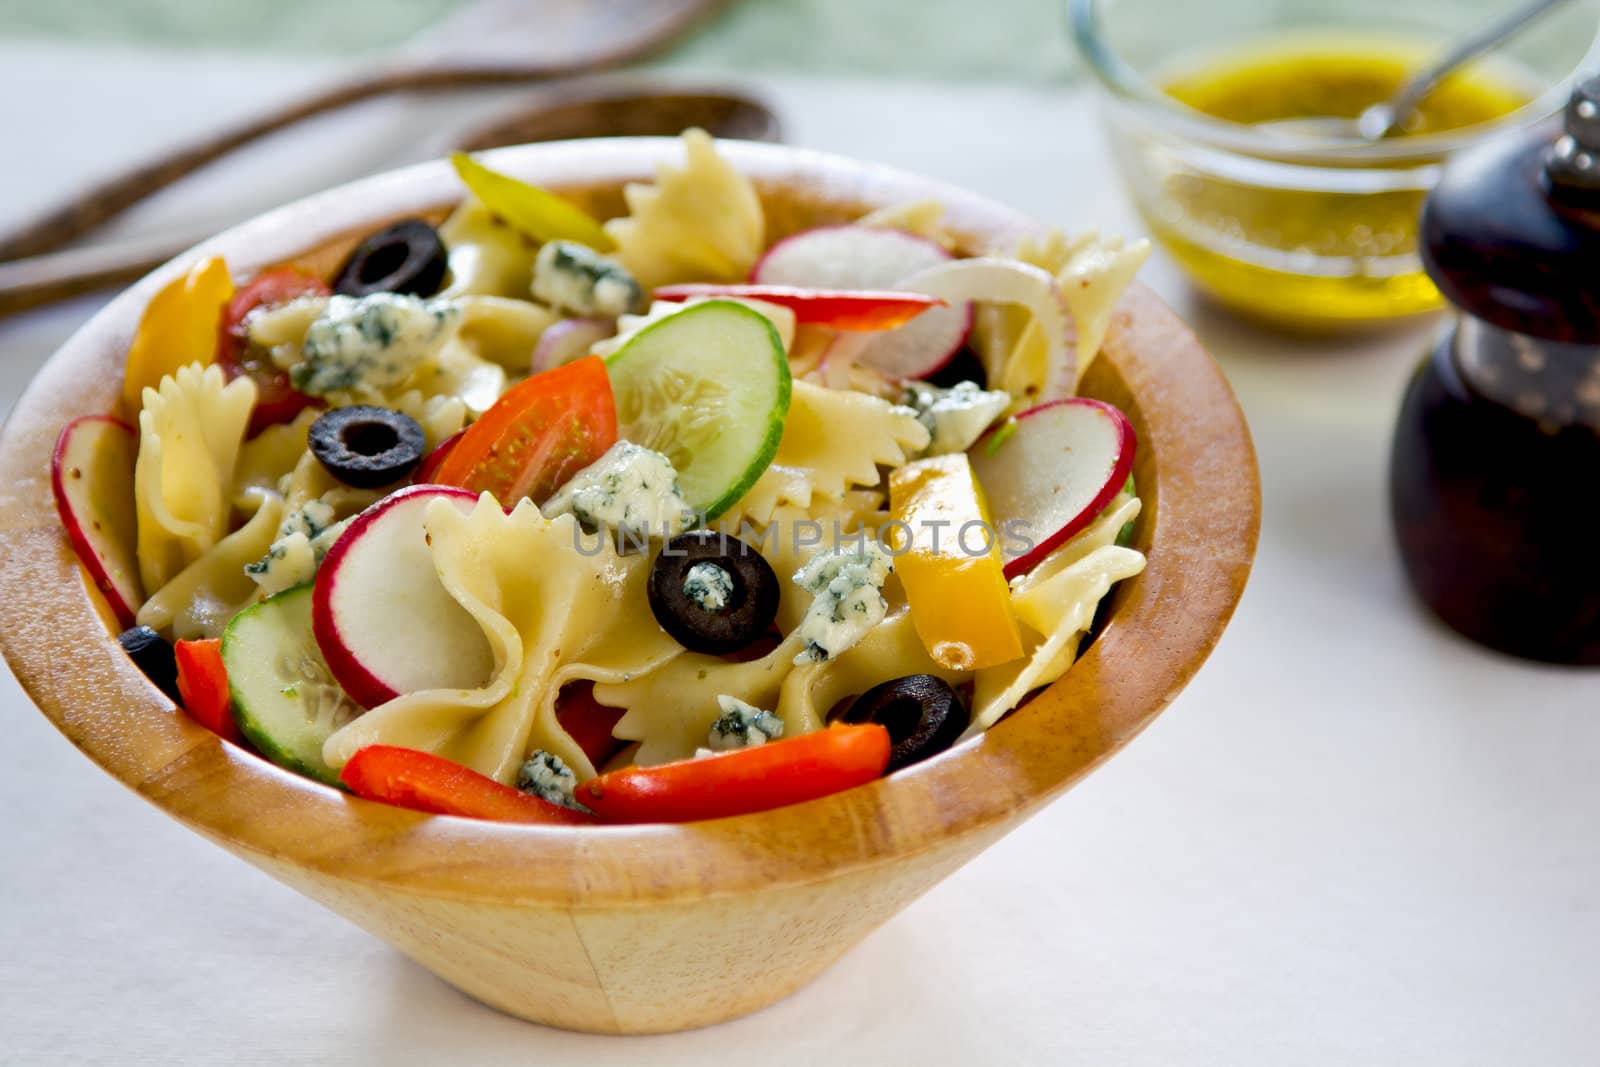 Farfalle with Blue cheese salad by vanillaechoes